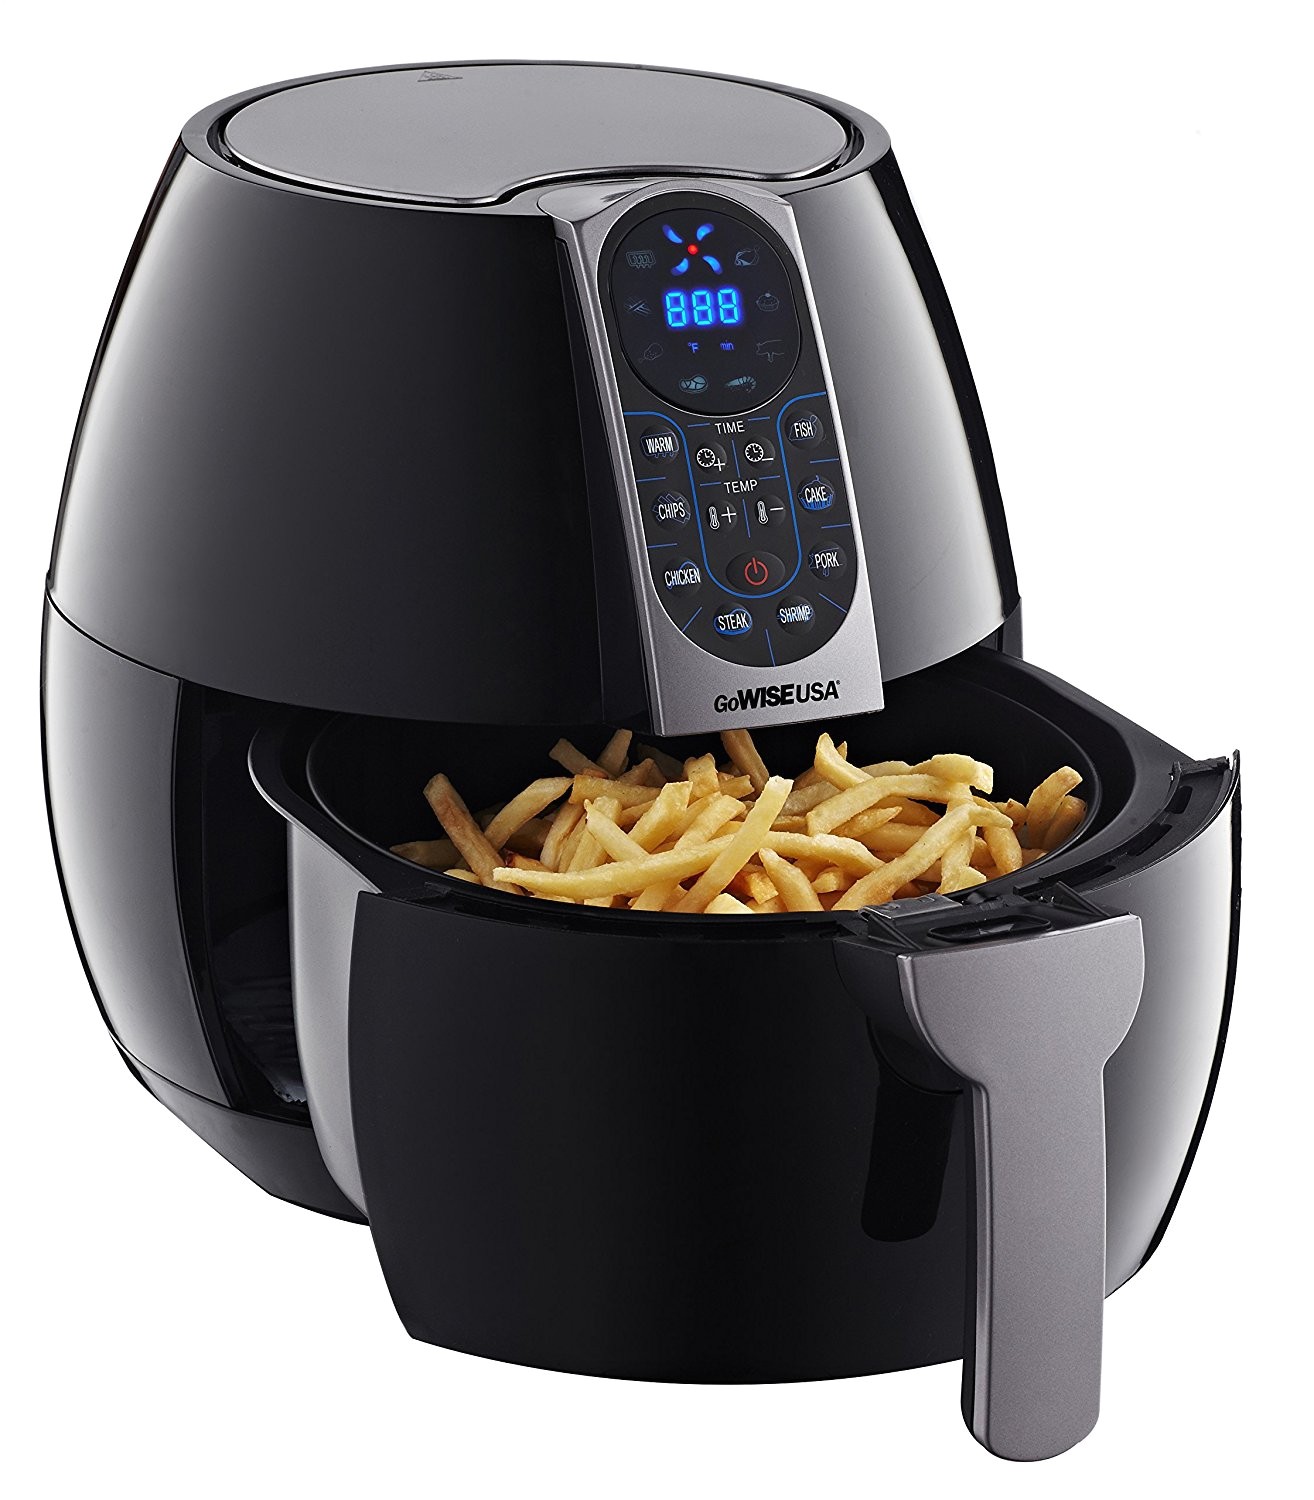 Gowise Usa 5.8 Qt. 8-in-1 Black Electric Air Fryer | AdinaPorter